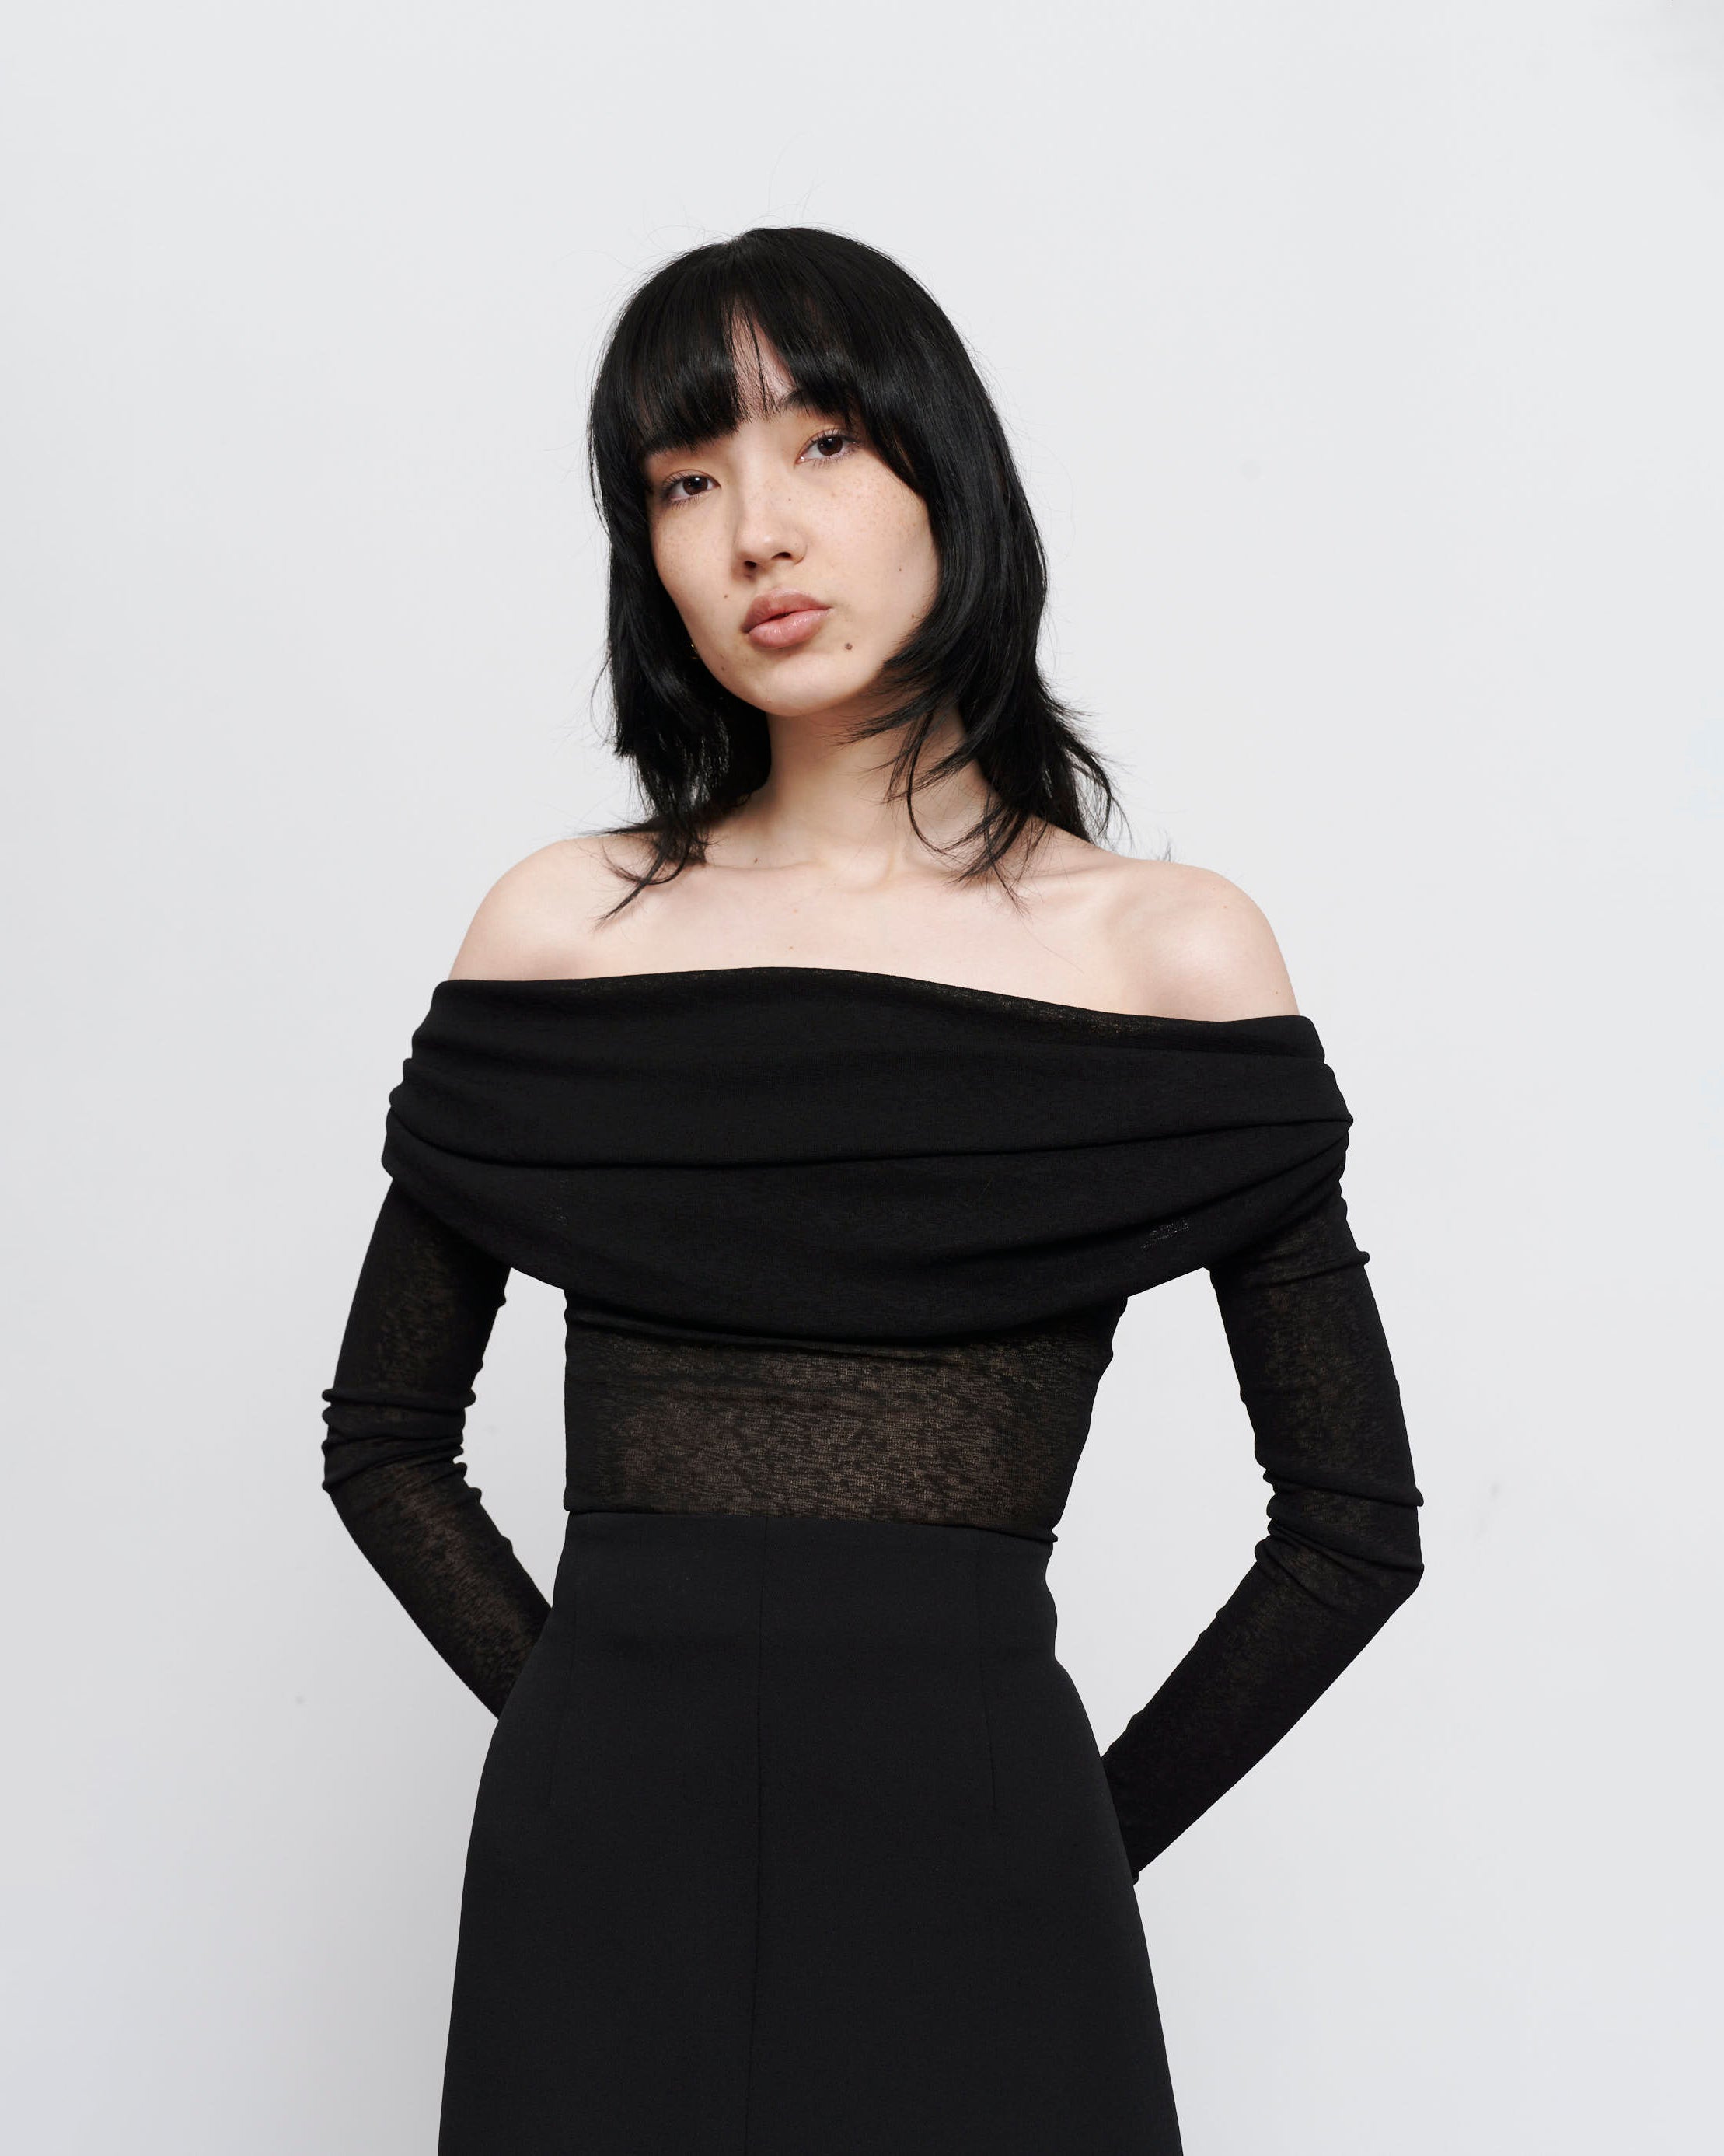 Black semi sheer, rouched off the shoulder top on women with dark hair and hands gently placed behind her back 